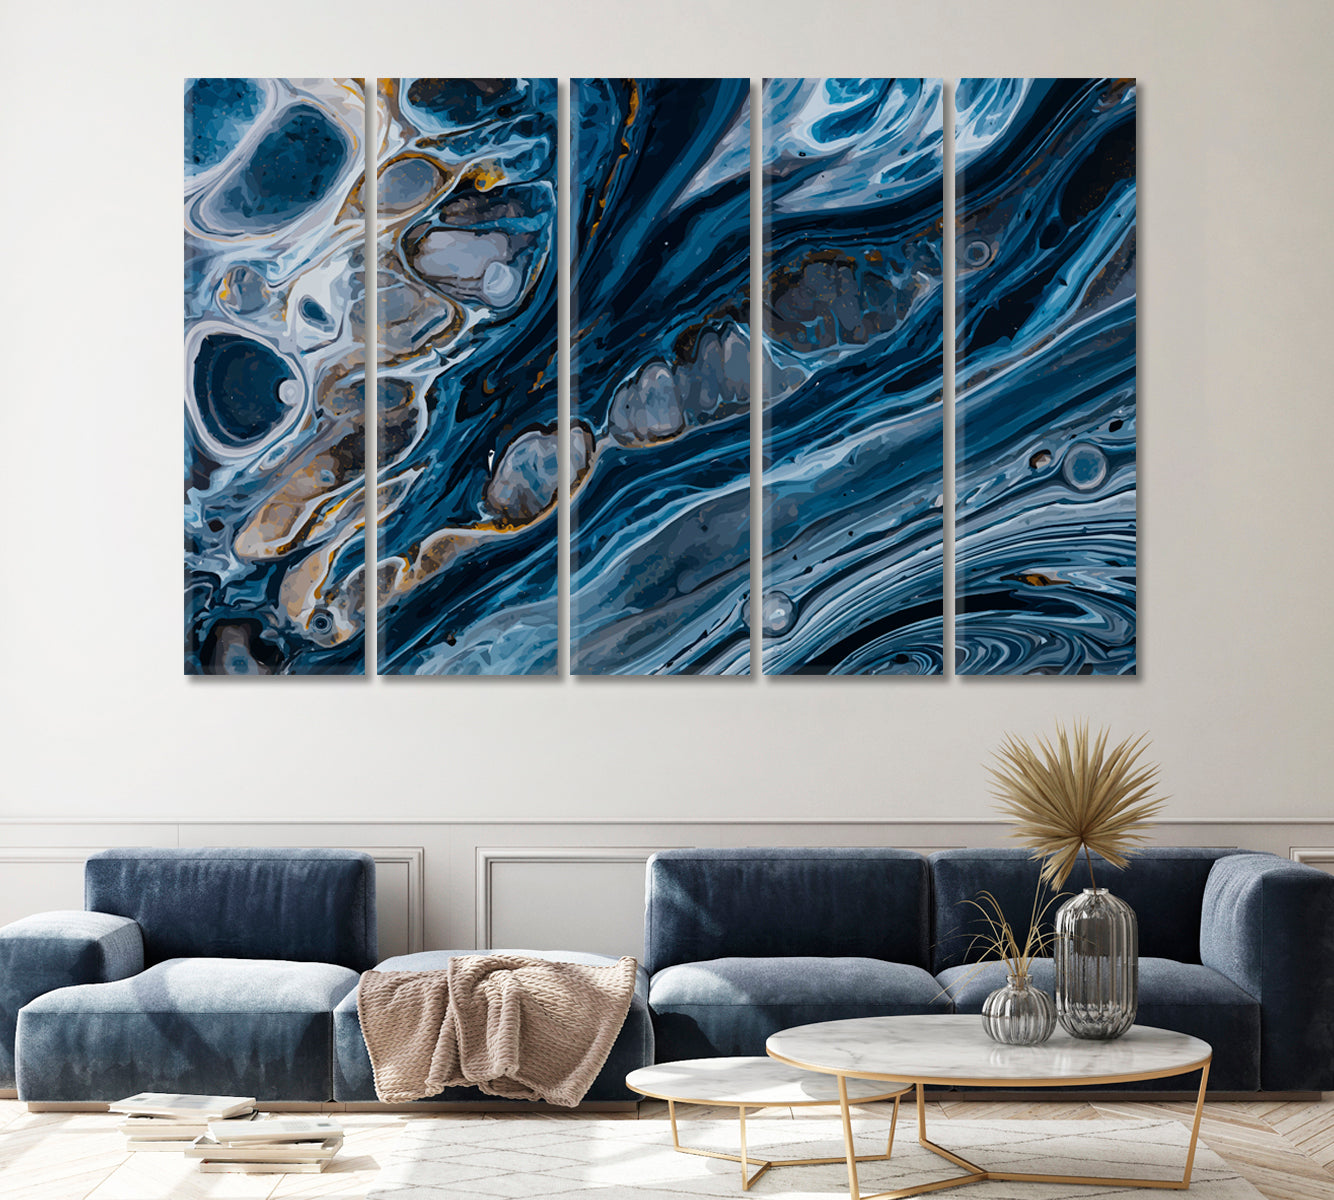 Abstract Navy Blue Stone Canvas Print ArtLexy 5 Panels 36"x24" inches 